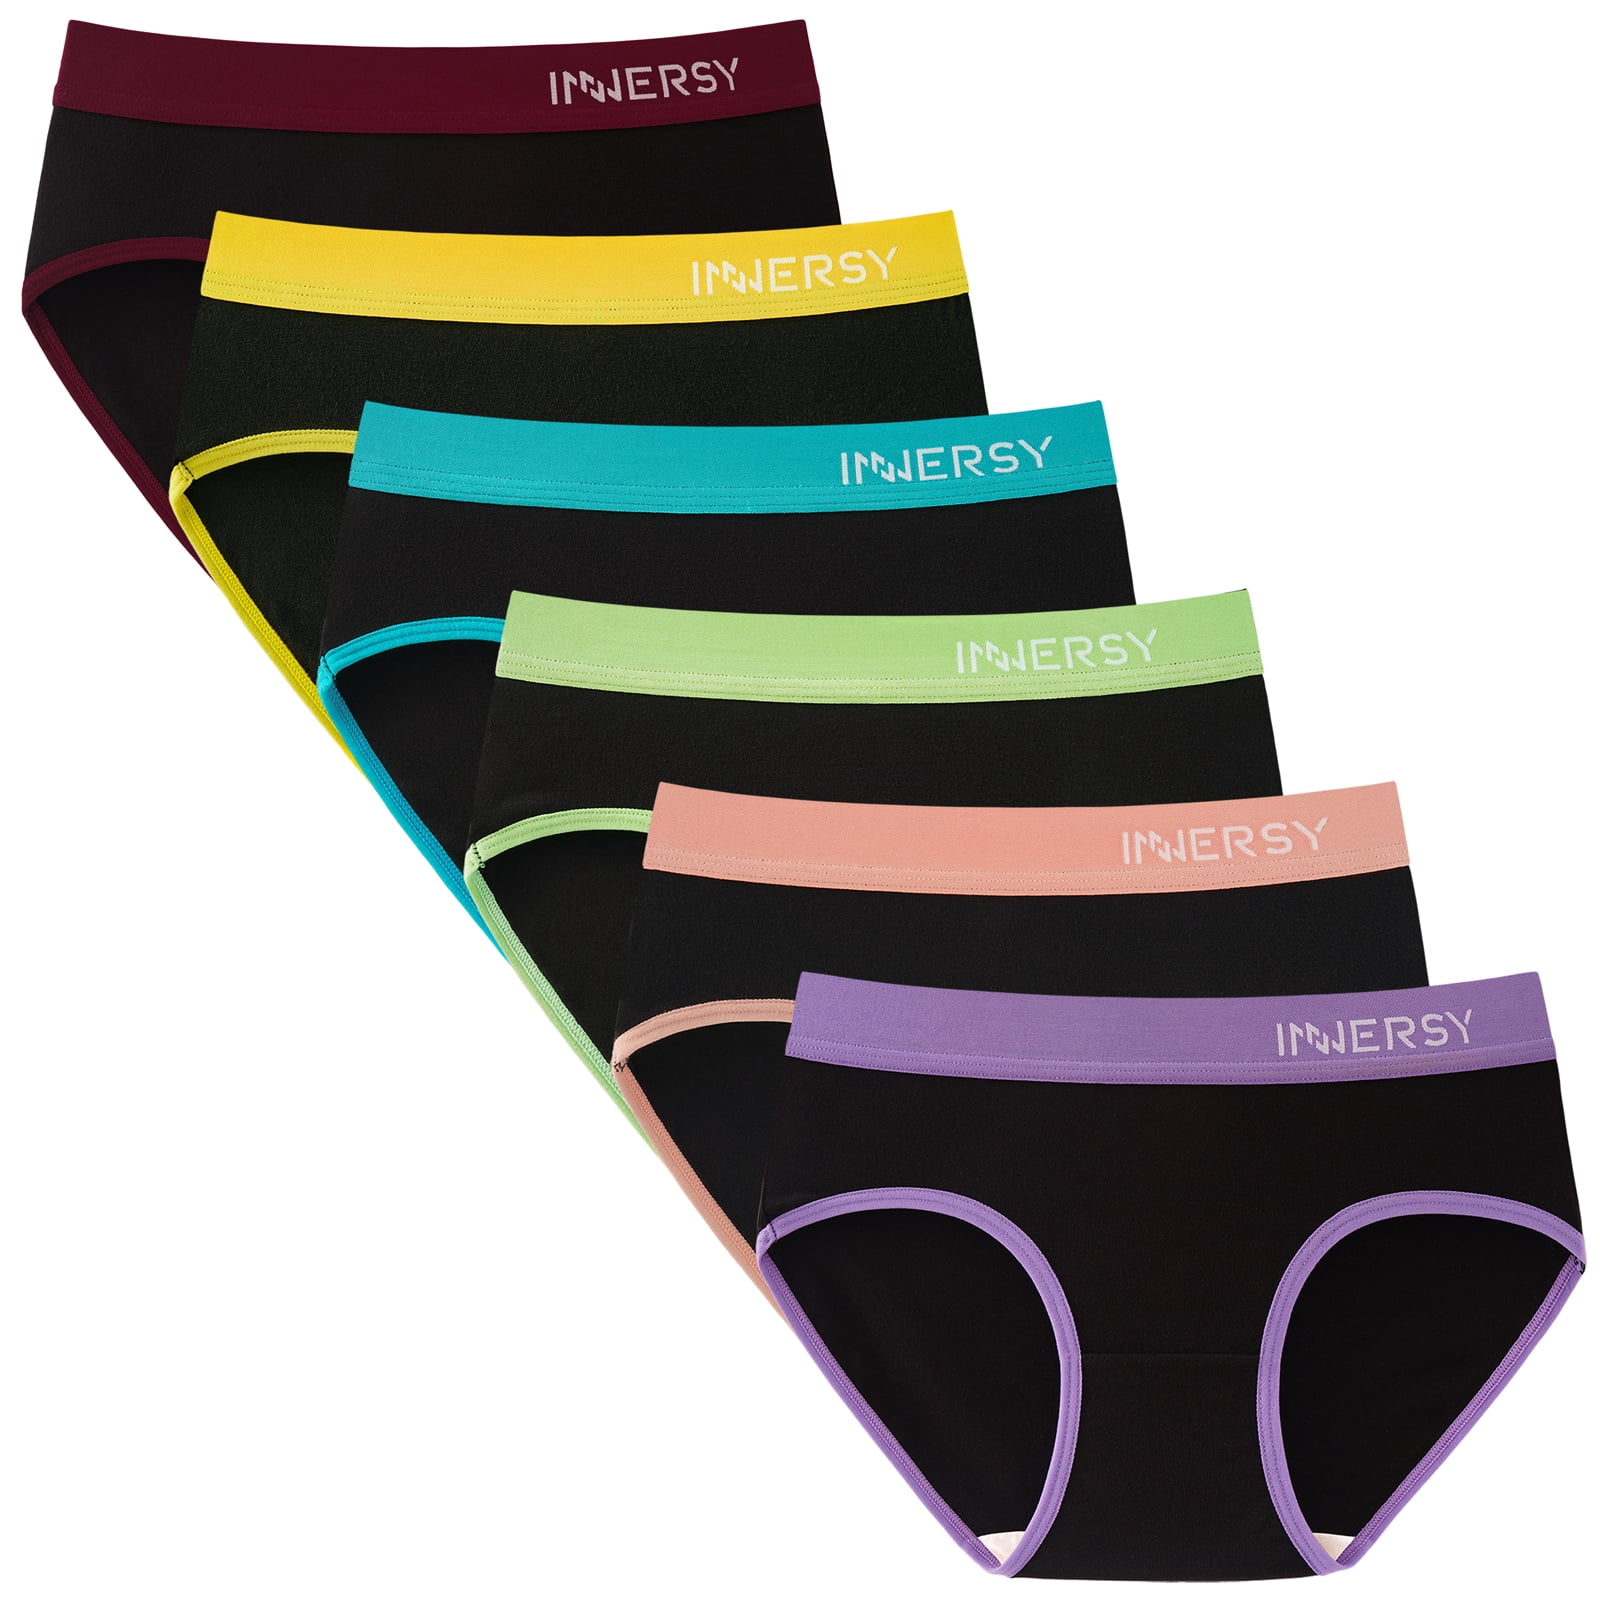 INNERSY Underwear for Girls Cotton Briefs Contrasting Color Teen